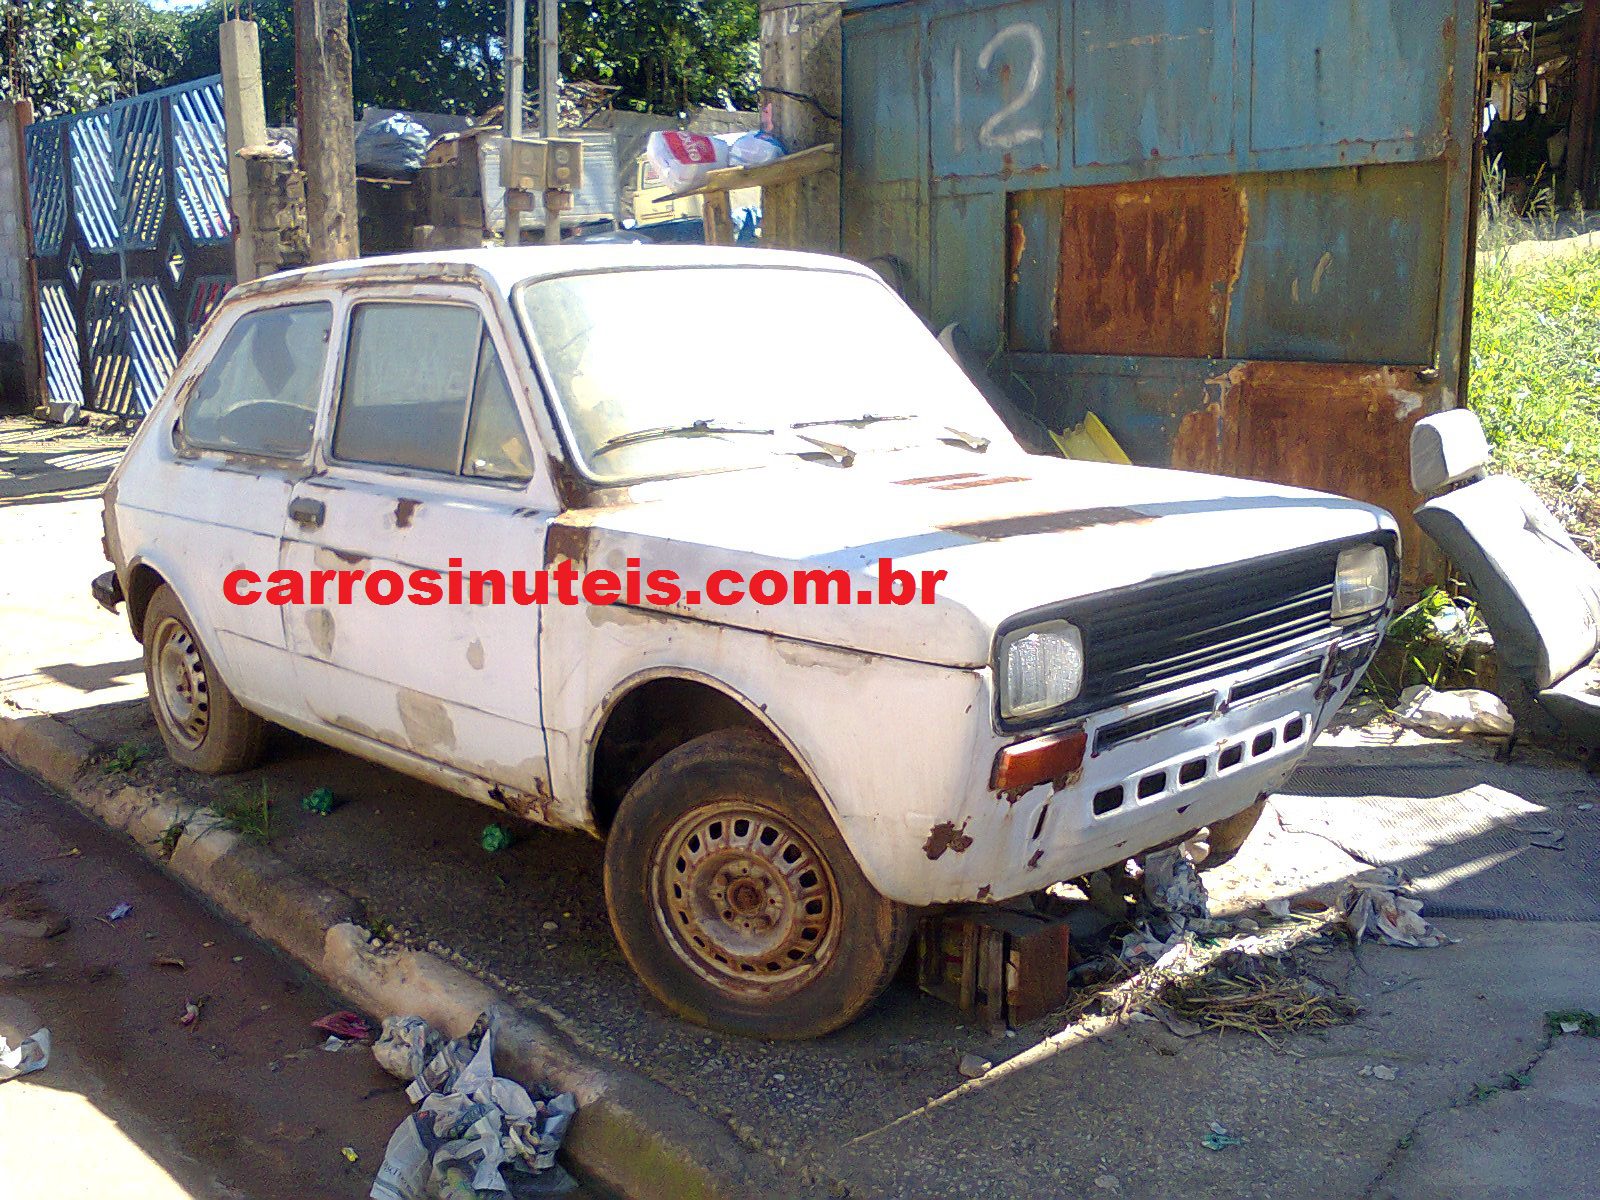 Fiat 147, Guarulhos – SP, by Gustavo